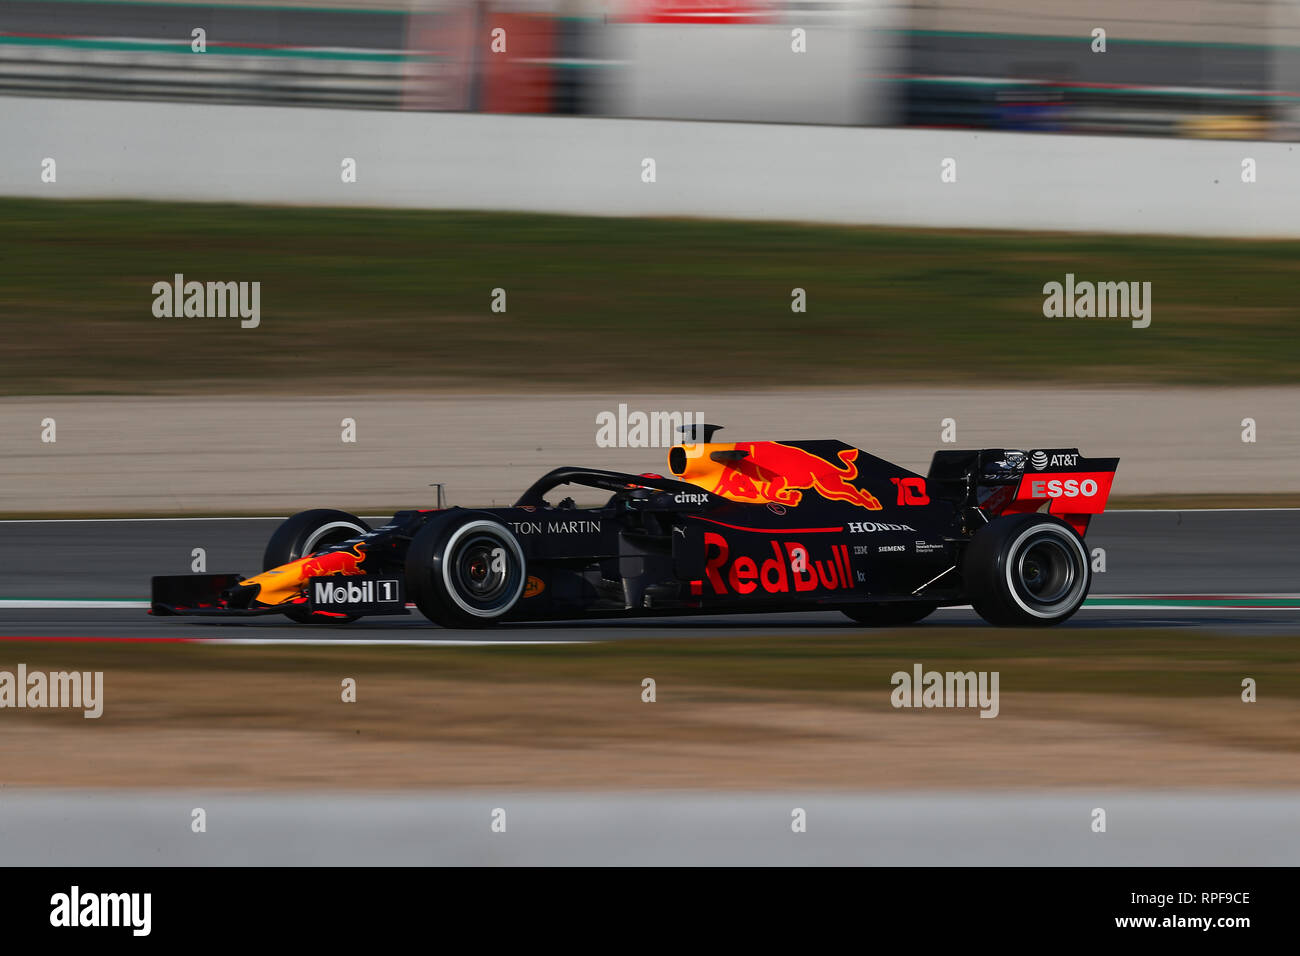 Montmelo, Spain. 21st Feb, 2019. Pierre Gasly of France driving the (10) Aston Martin RedBull Racing RB15 on track during day four of F1 Winter Testing Credit: Marco Canoniero/Alamy Live News Stock Photo